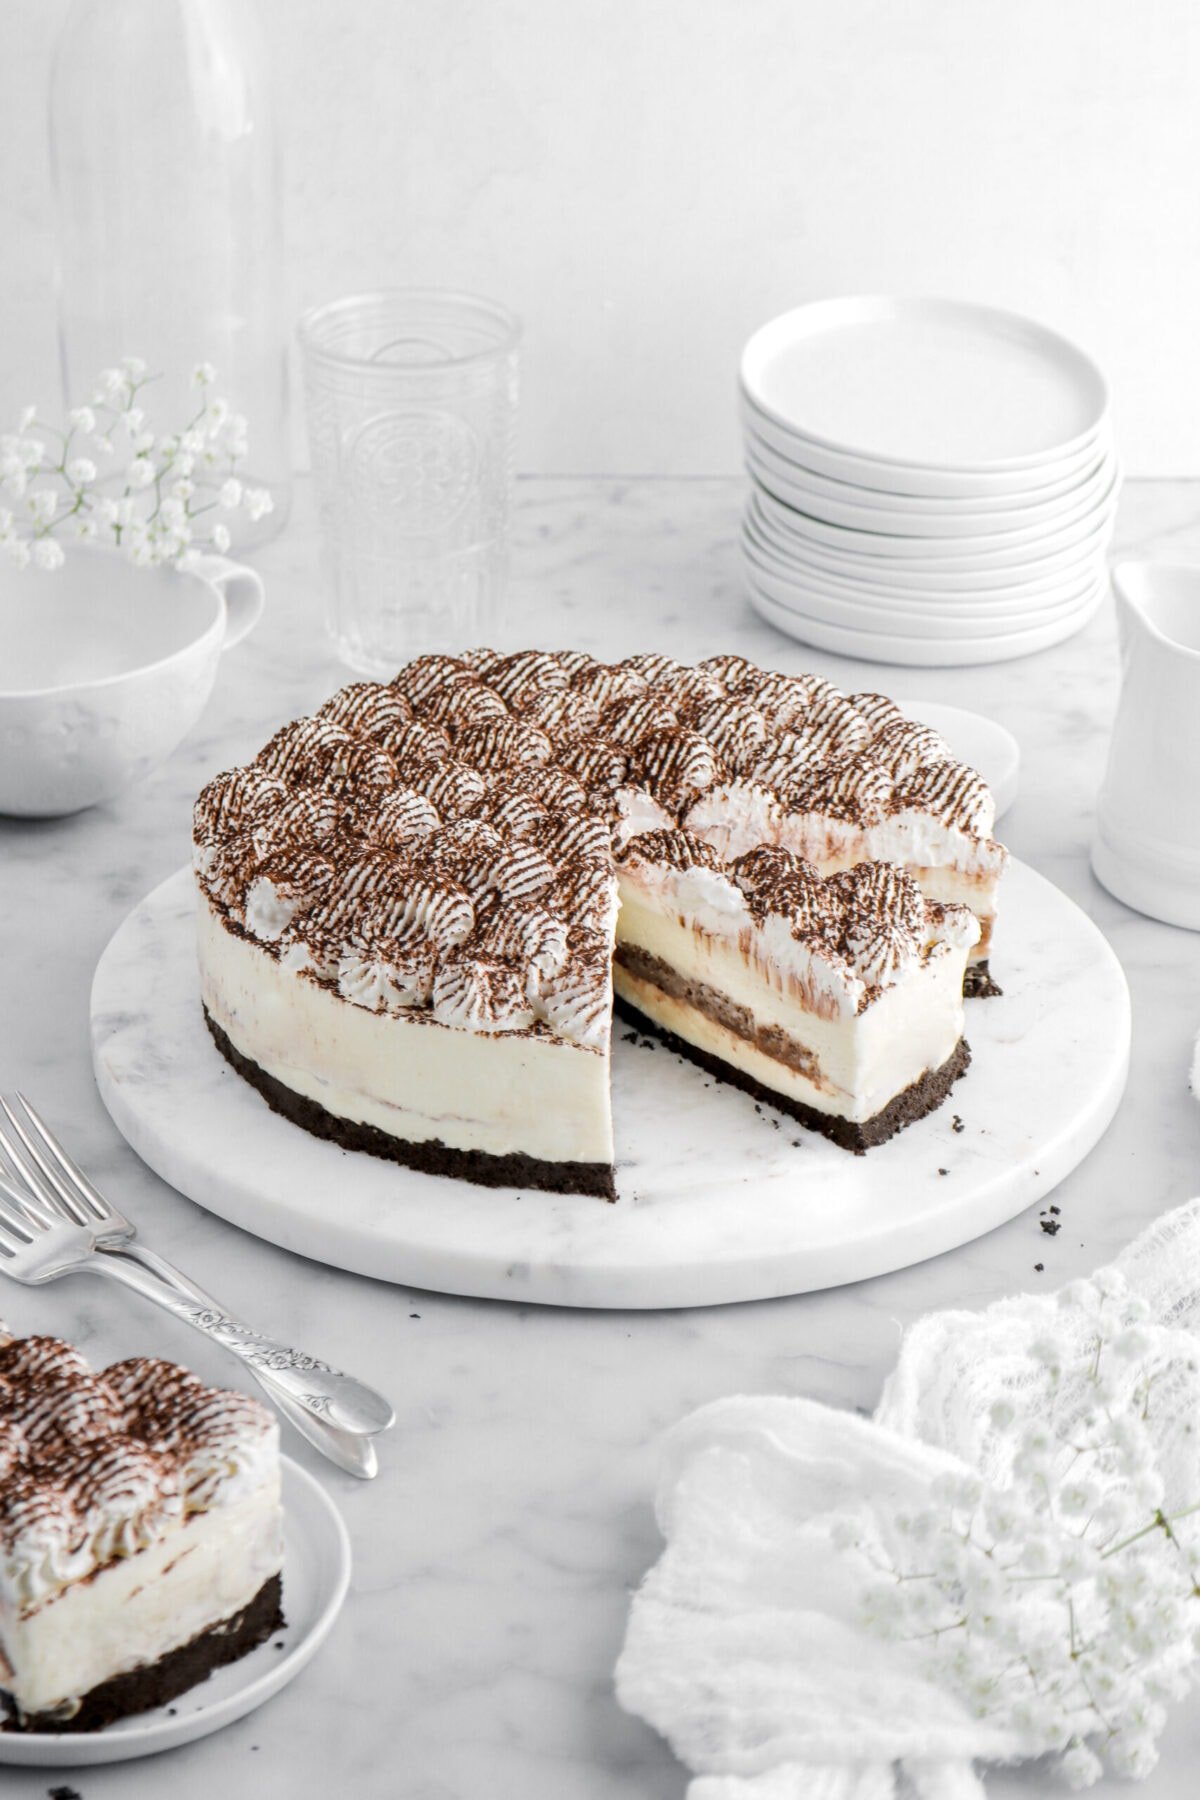 tiramisu cheesecake with slice cut into it on round marble tray with another slice on small white plate beside and stack of plates behind.